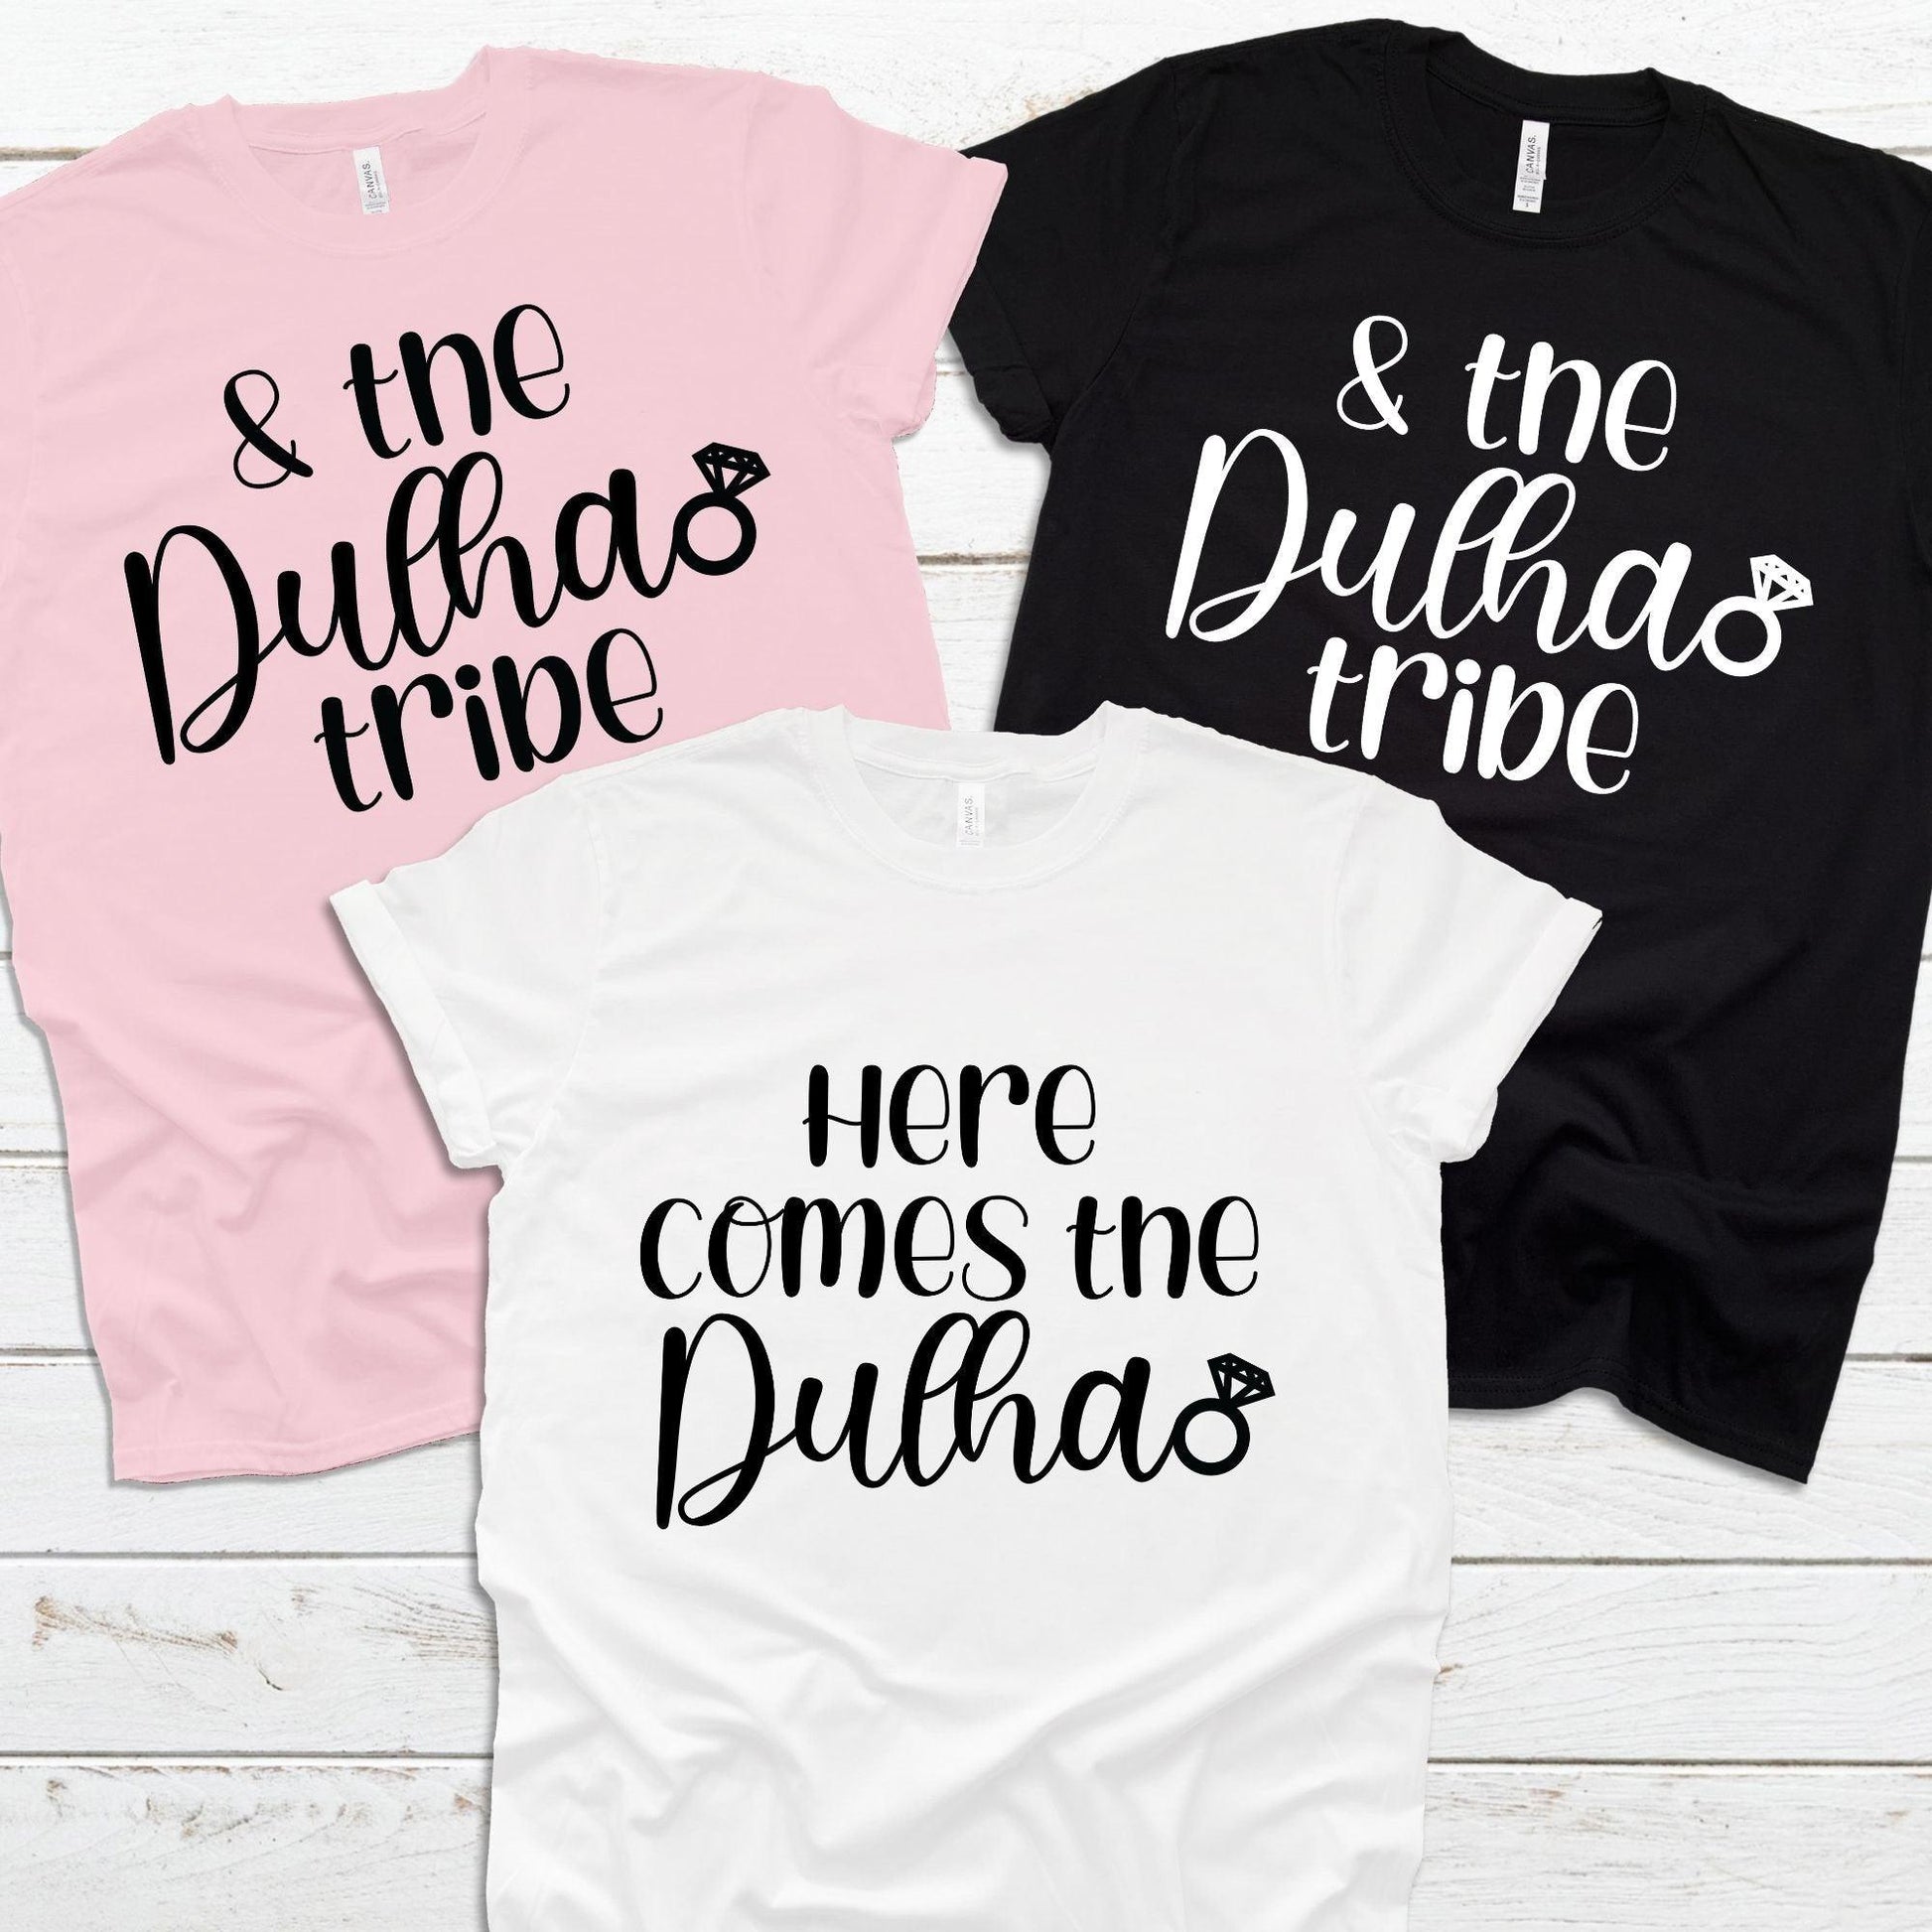 Here comes the Dulha / Dulhan (Groom / Bride) Shirts - Artkins Lifestyle